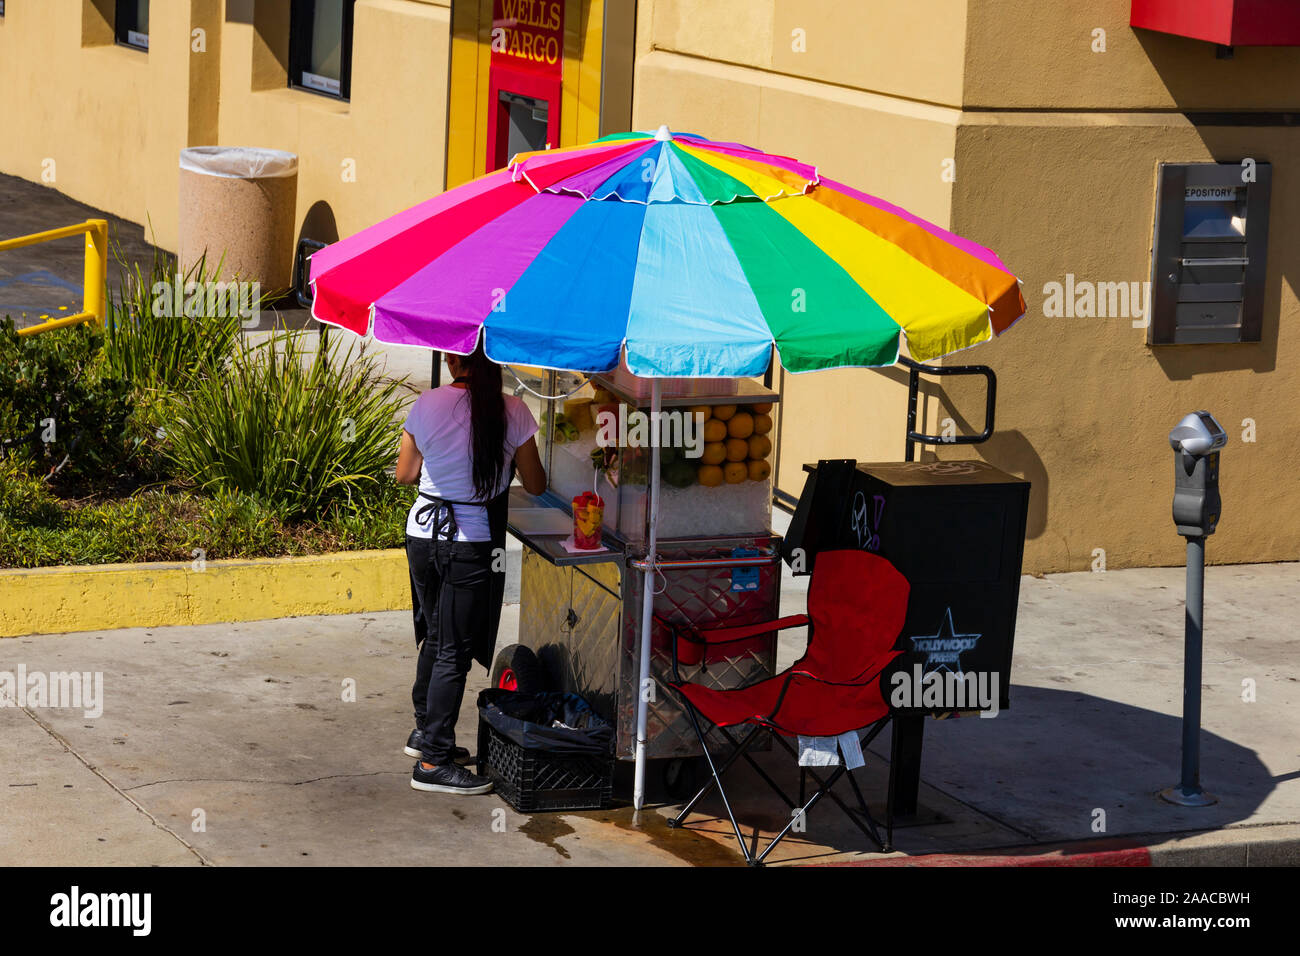 Sidewalk vendor stall with woman selling fruit smoothies under a colourful umbrella. Los Angeles, California, United States of America. Stock Photo